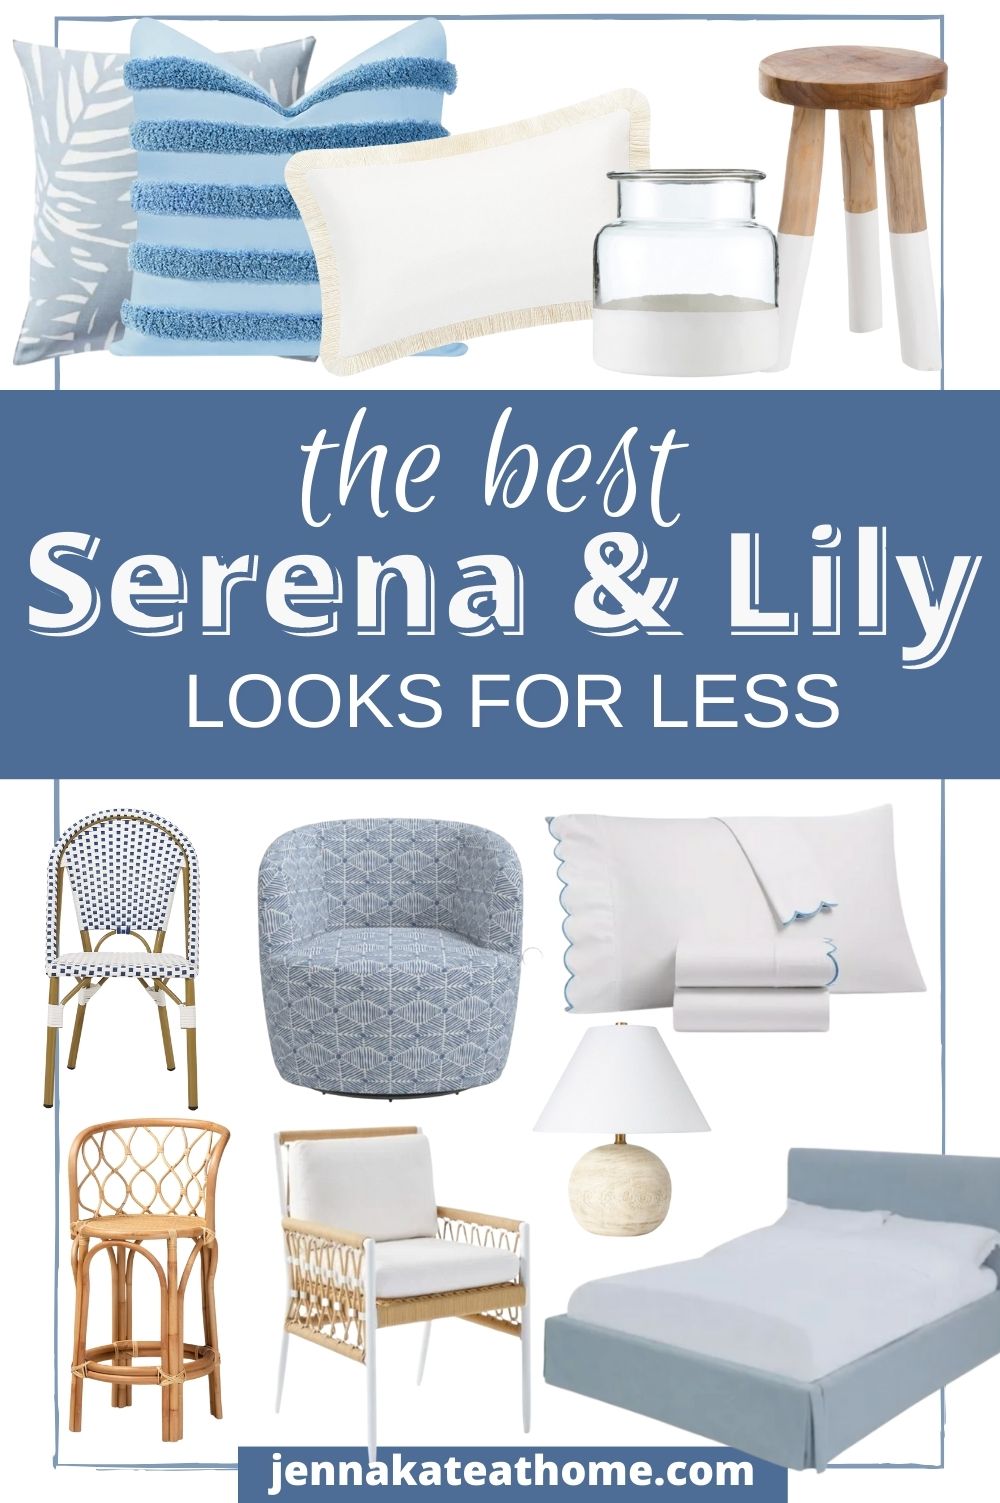 serena & lily look for less pin image